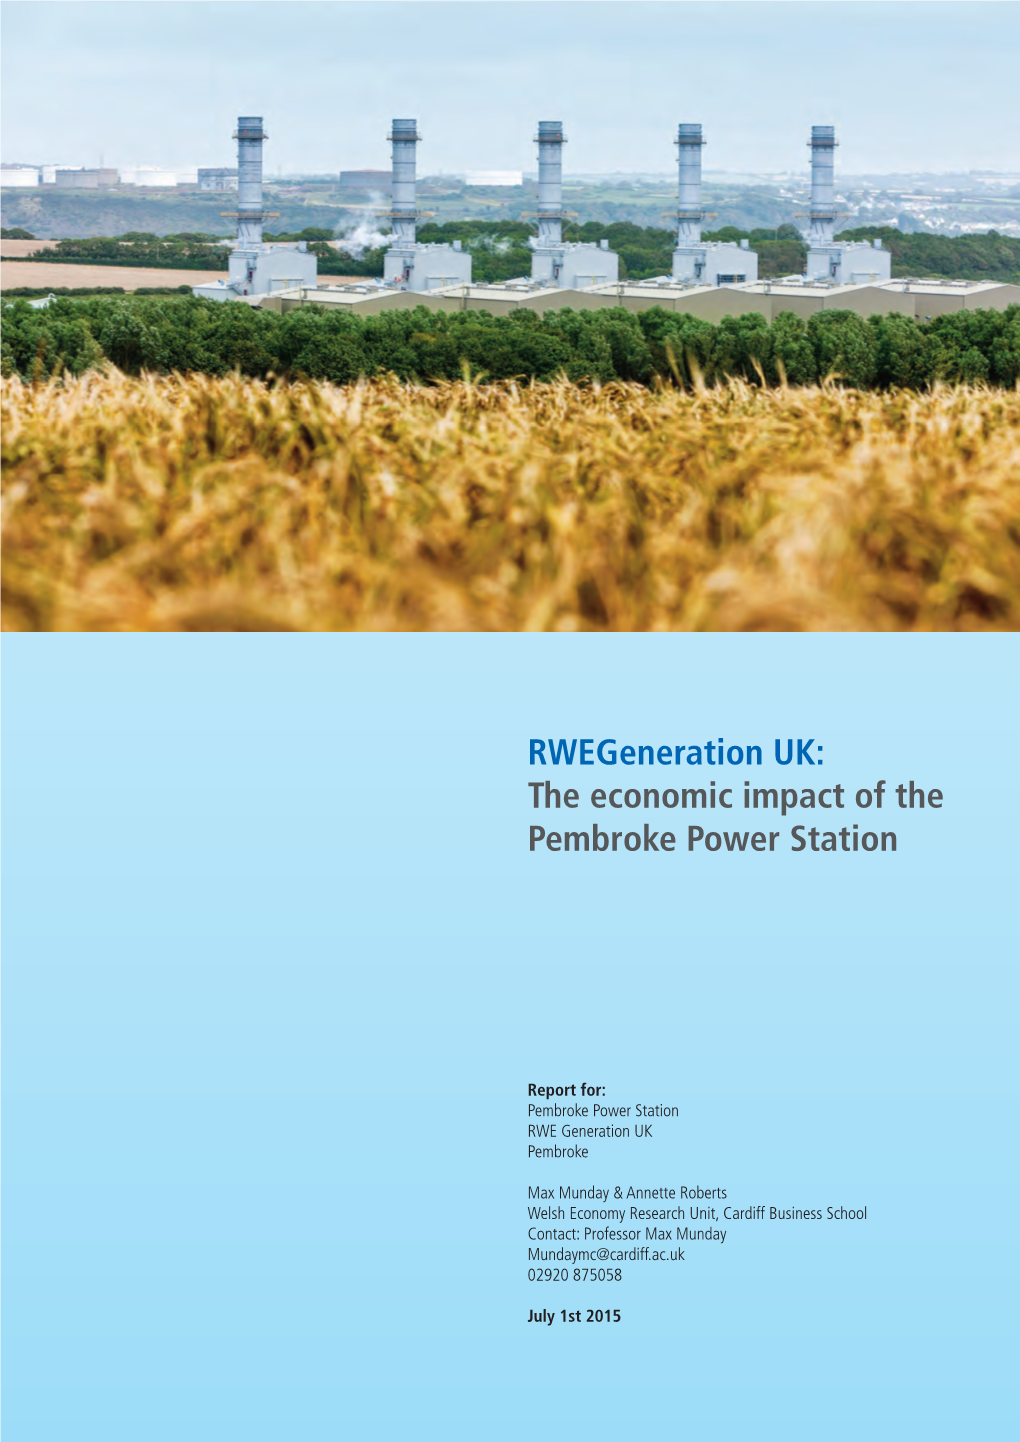 The Economic Impact of the Pembroke Power Station